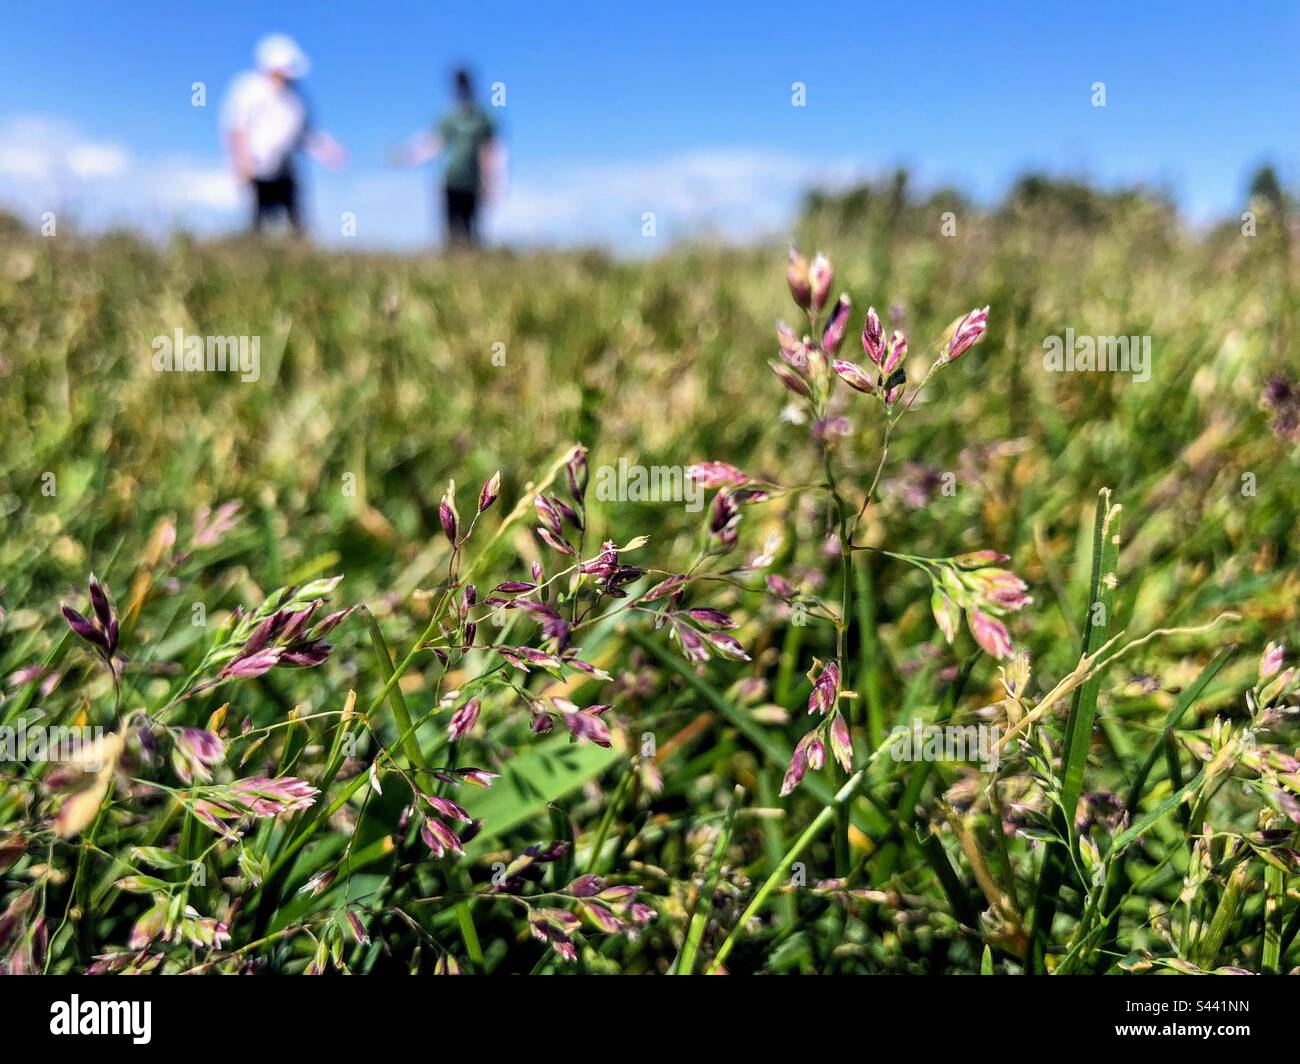 Close up view of the Poa Pratensis plant on the middle of the meadow with two blurred human silhouettes on the background Stock Photo